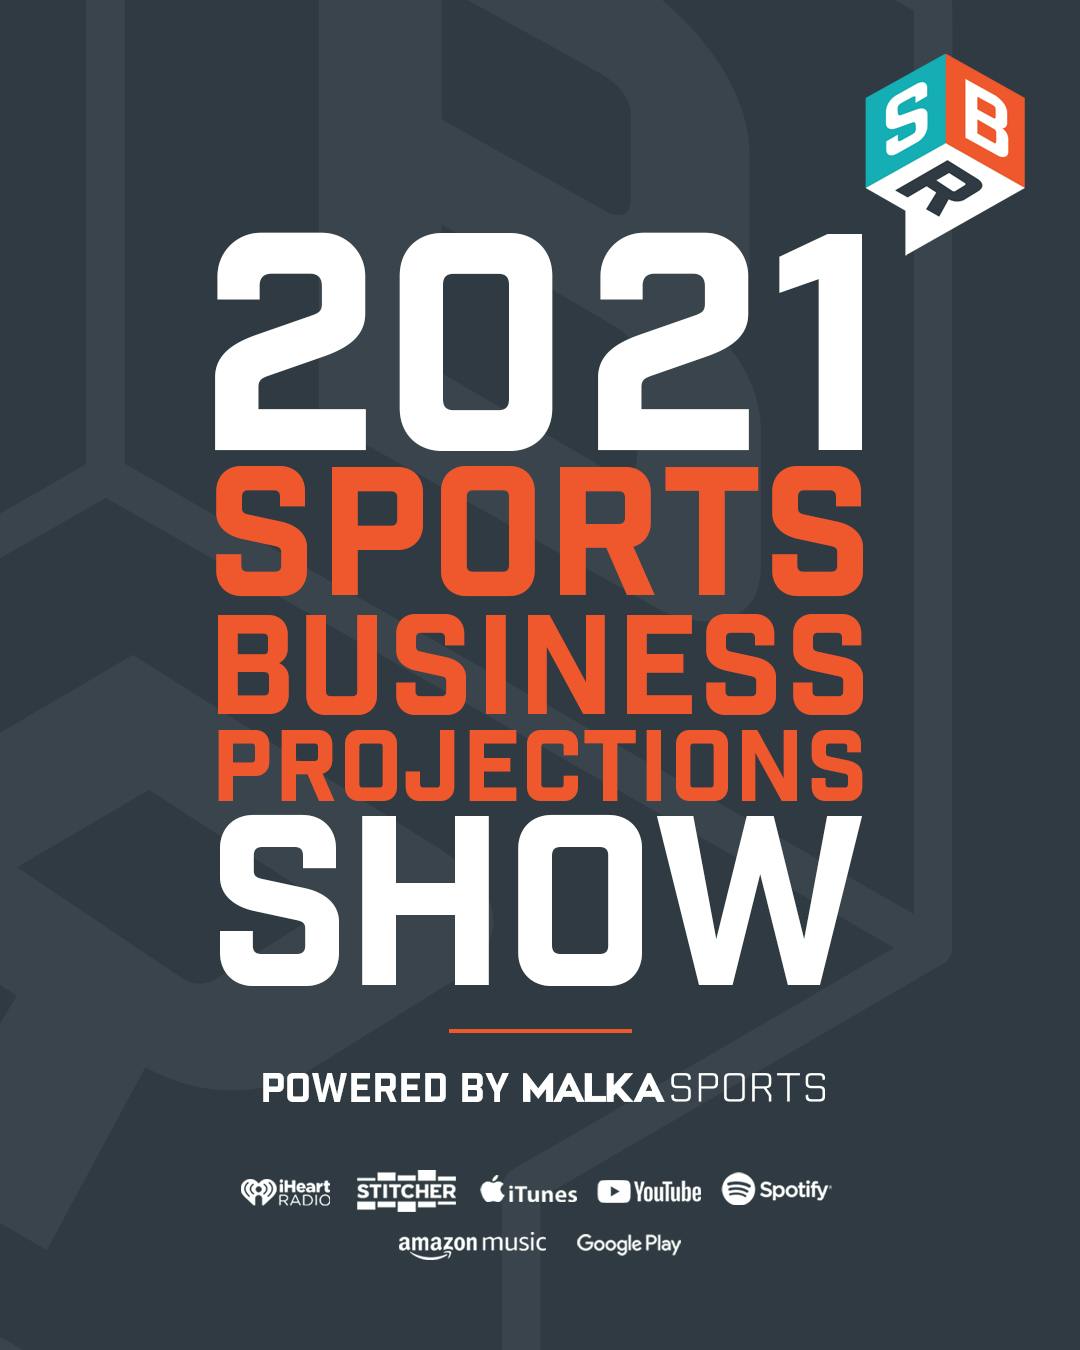 2021 Sports Business Projections Show